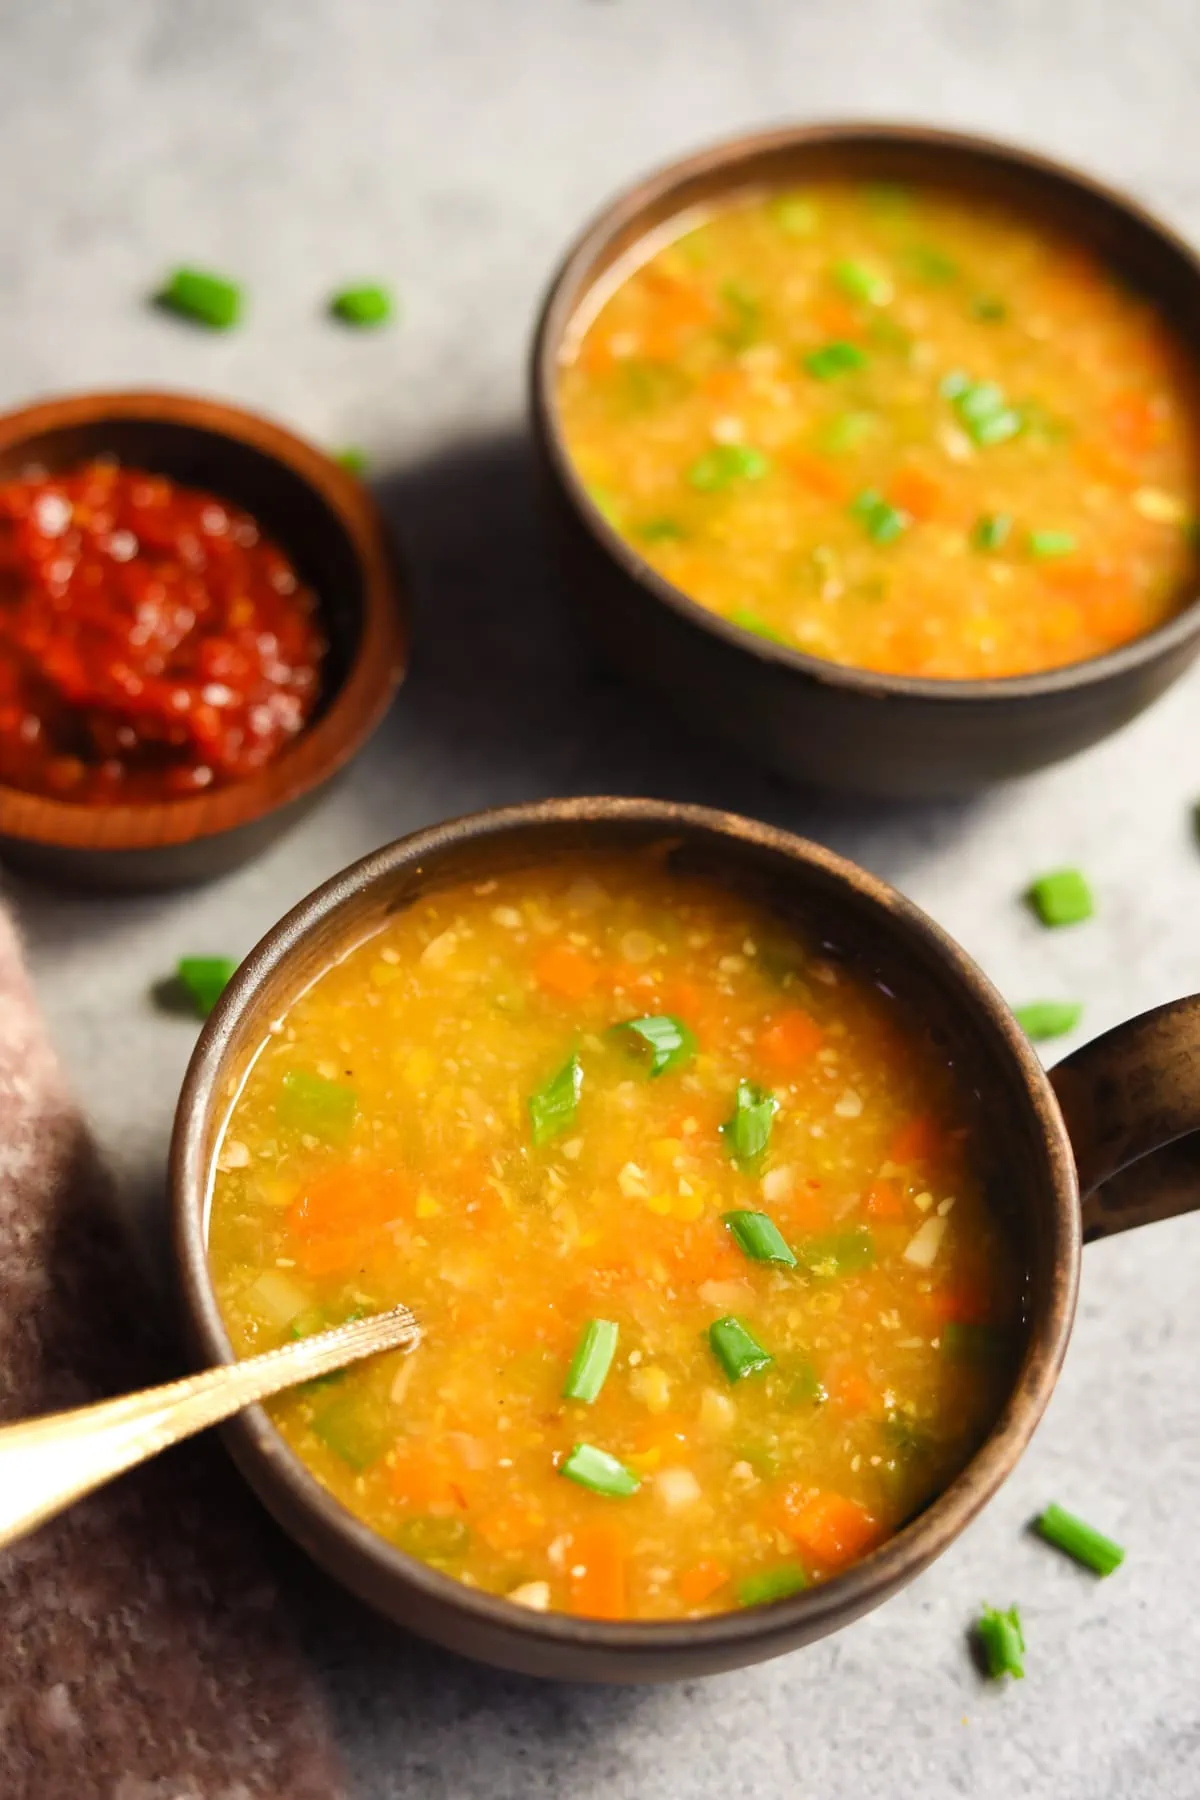 Delicious sweet corn soup topped with green onions served in two bowls.